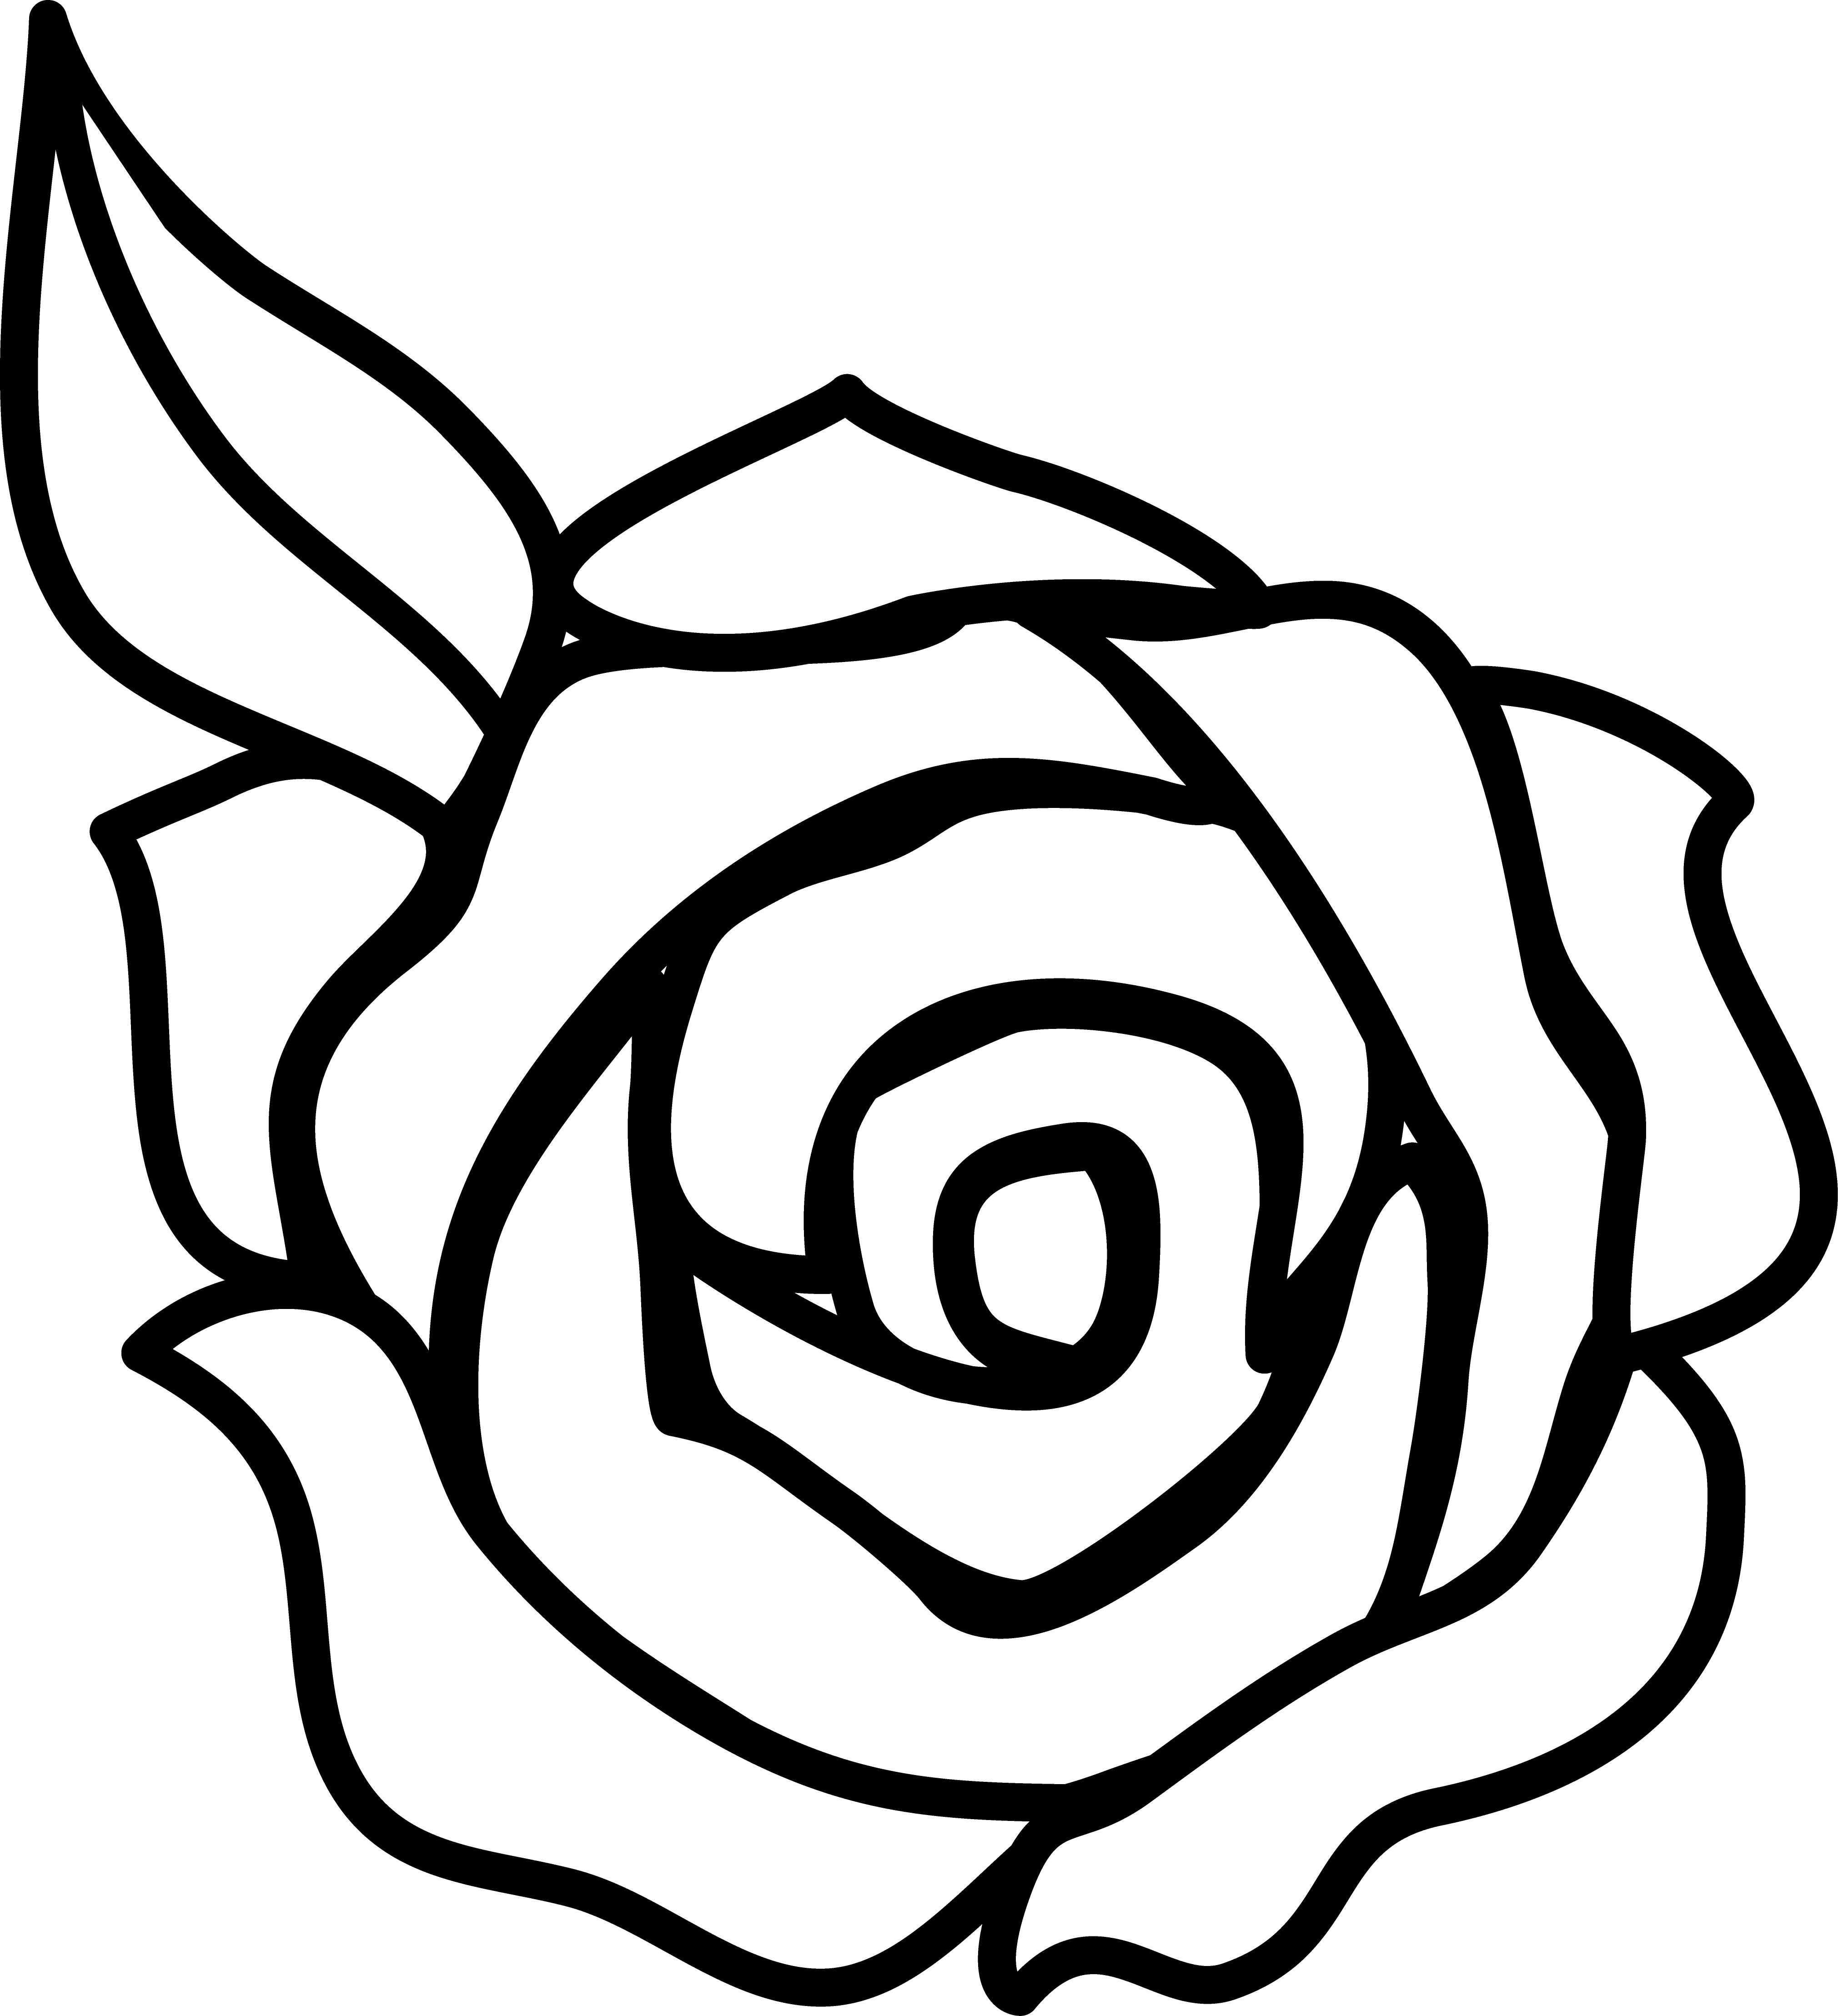 Roses Clipart Black And White